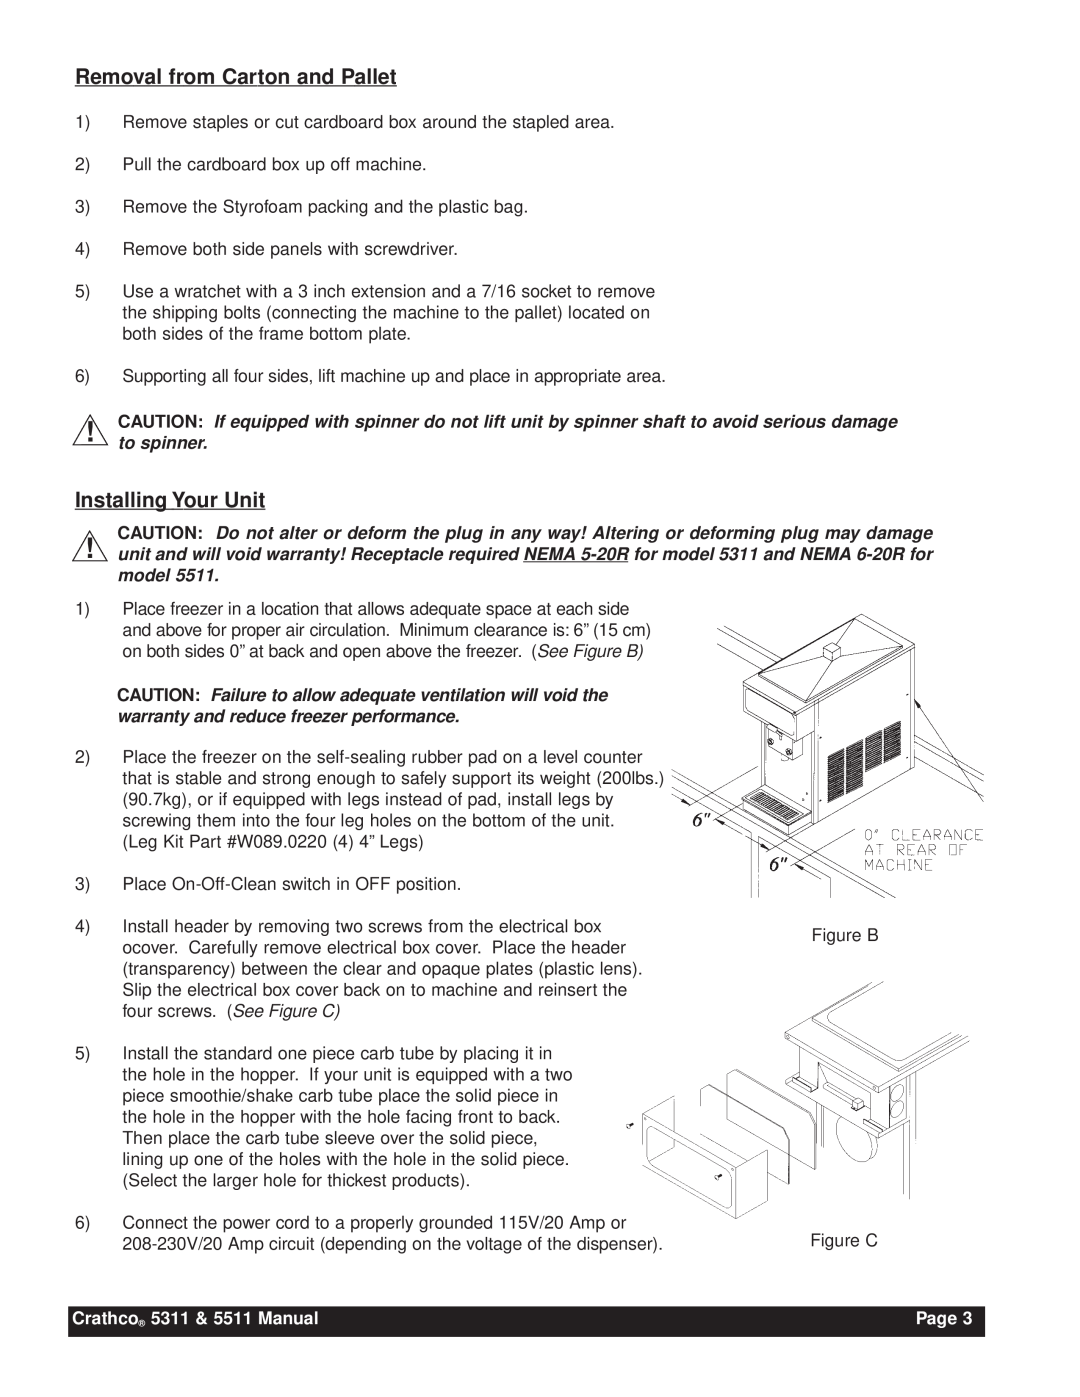 Grindmaster instruction manual Removal from Carton and Pallet, Installing Your Unit, Crathco 5311 & 5511 Manual, Page 